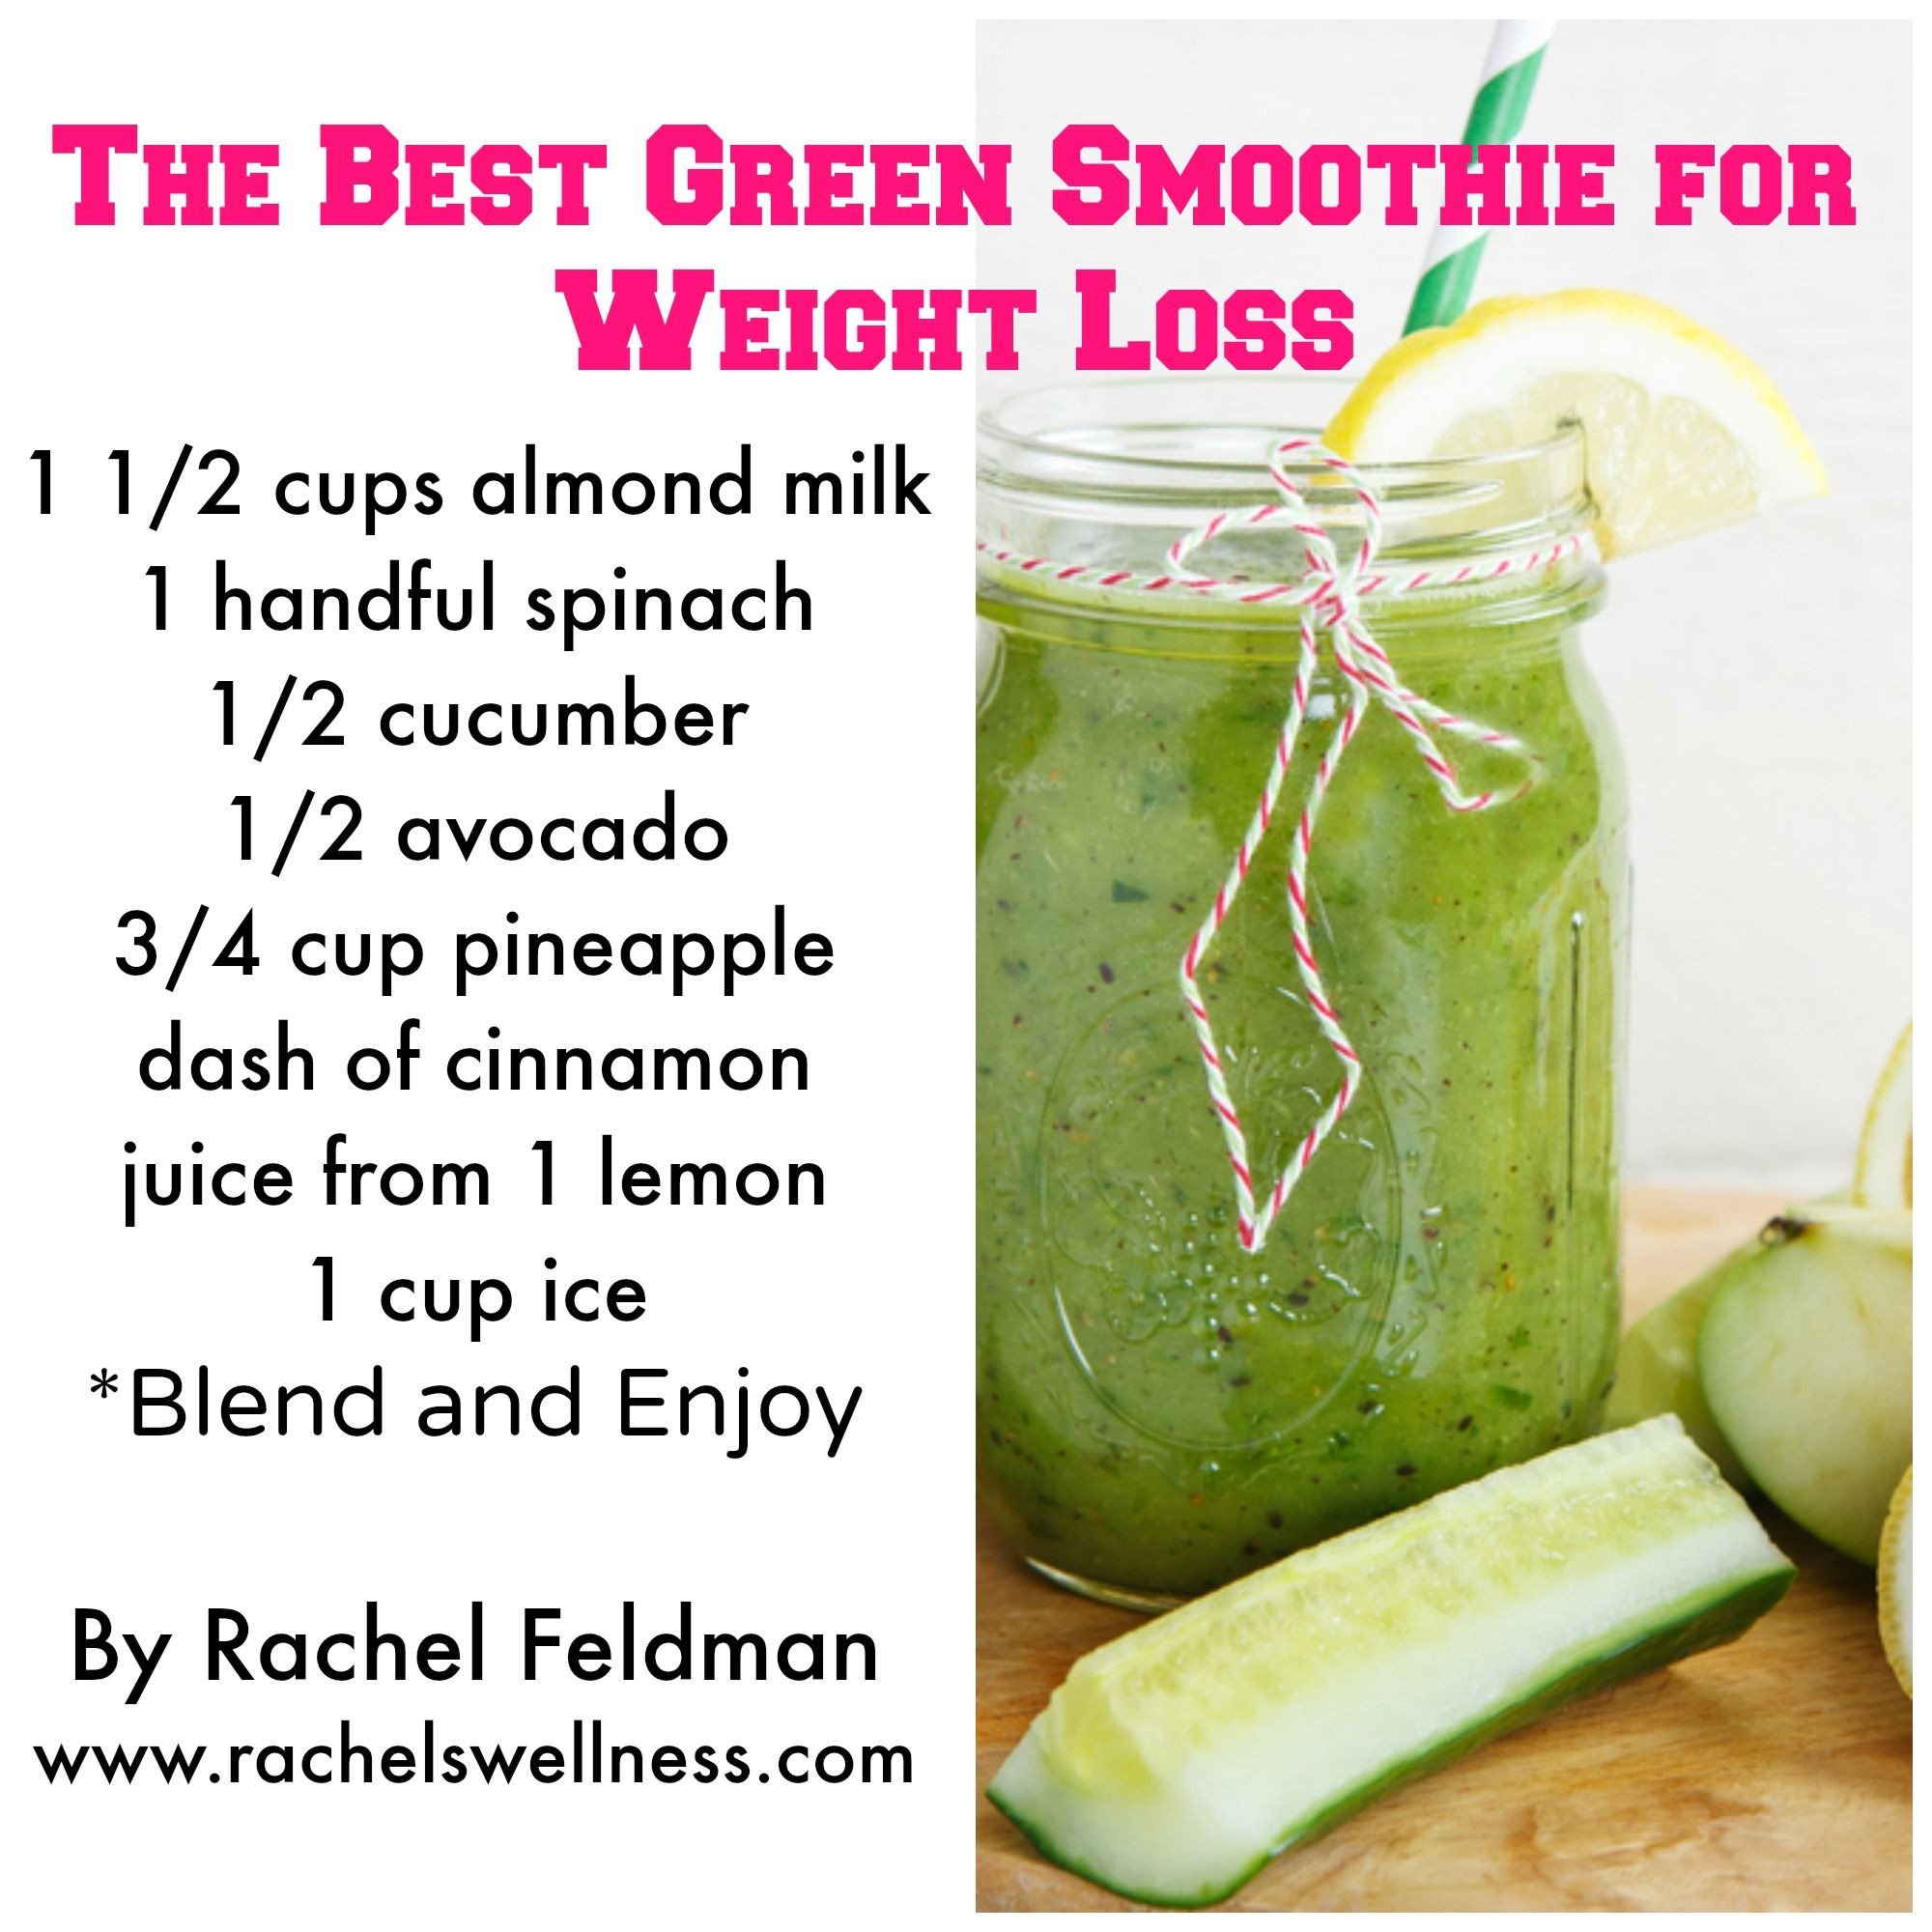 Weight Loss Smoothies
 7 Healthy Green Smoothie Recipes For Weight Loss